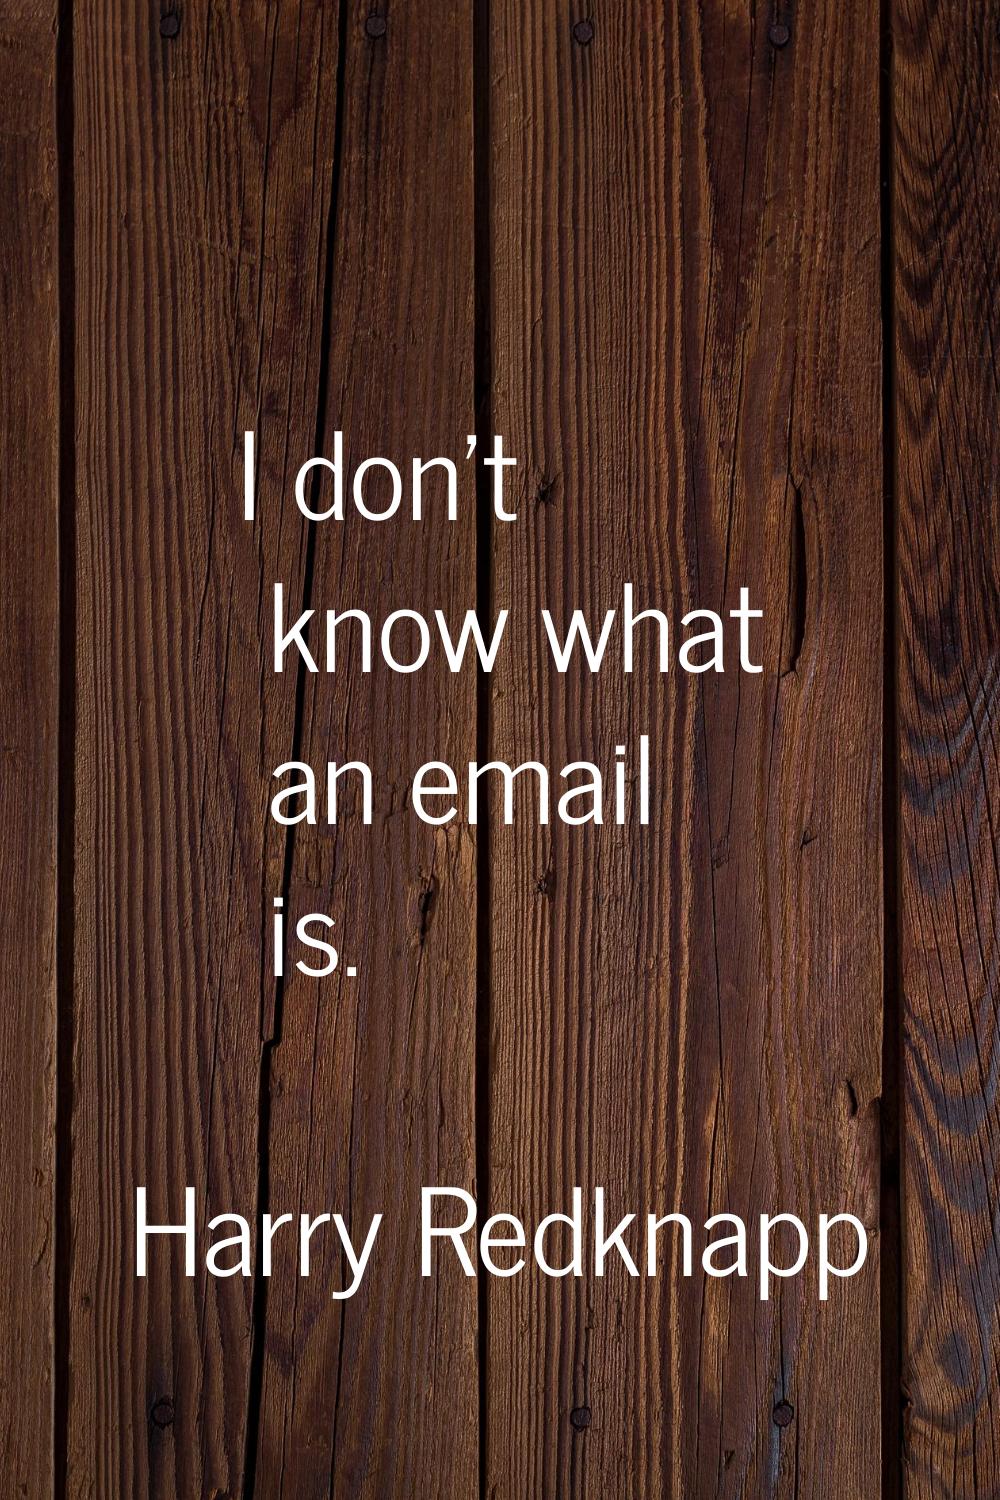 I don't know what an email is.